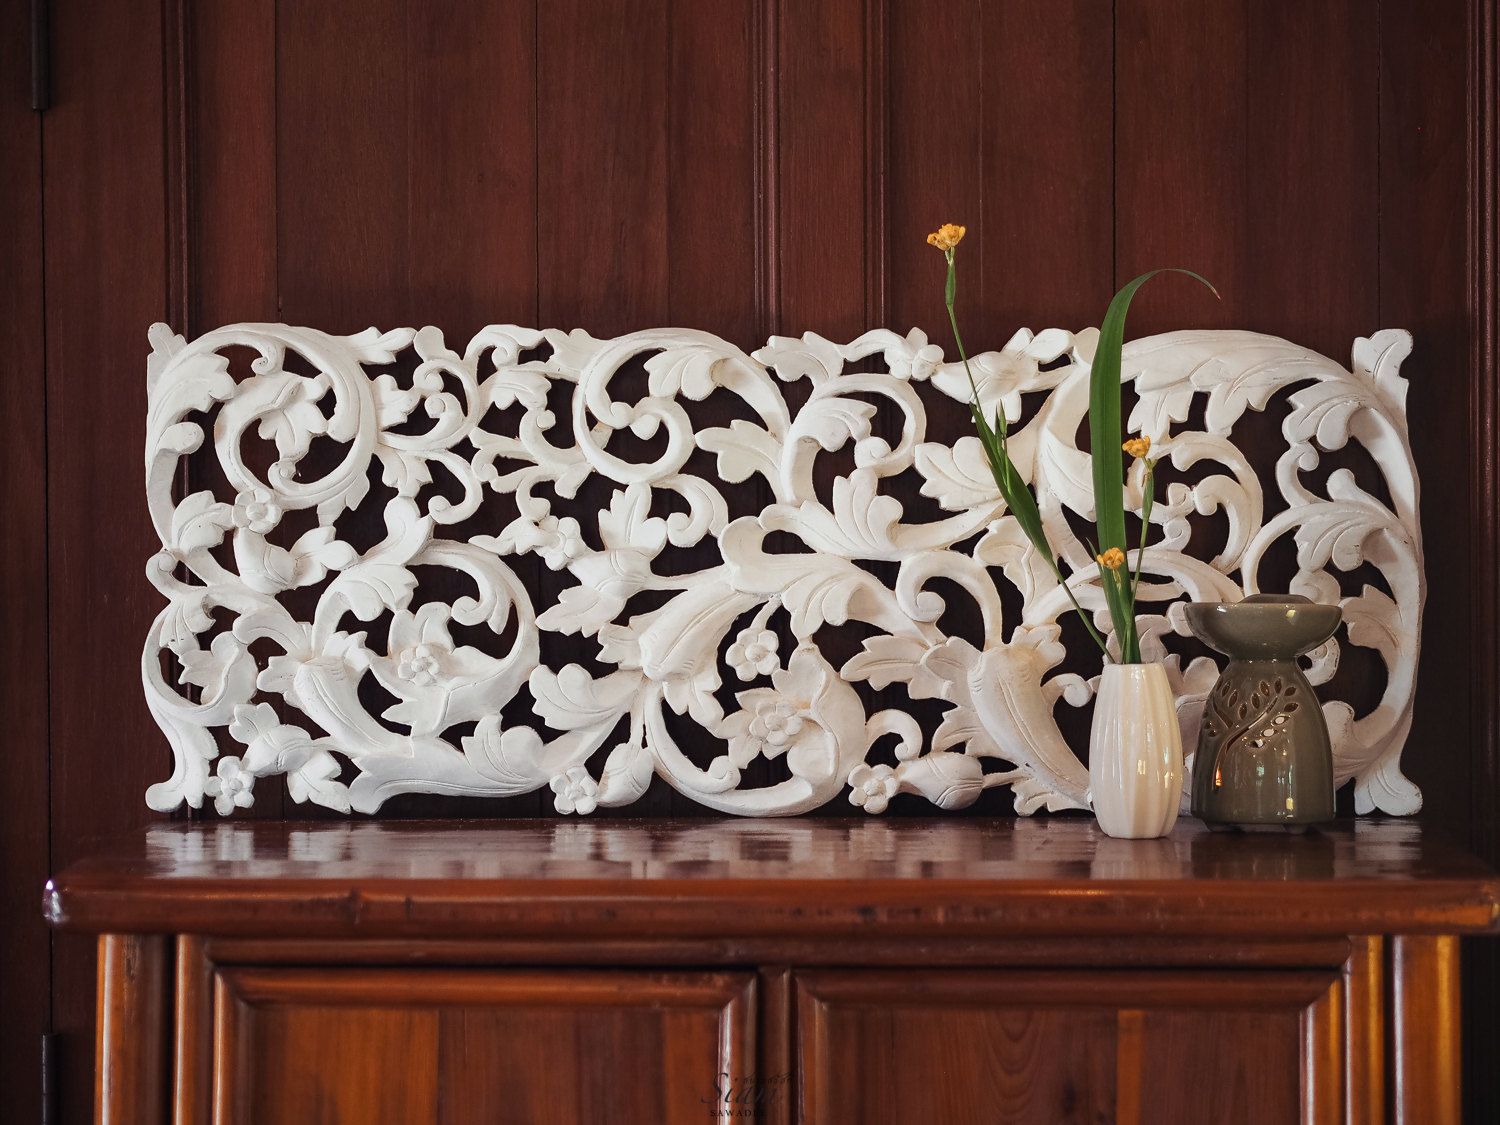 Tropical Floral Curving Wooden Carving Wall Hanging With Best And Newest Landscape Wood Wall Art (View 16 of 20)